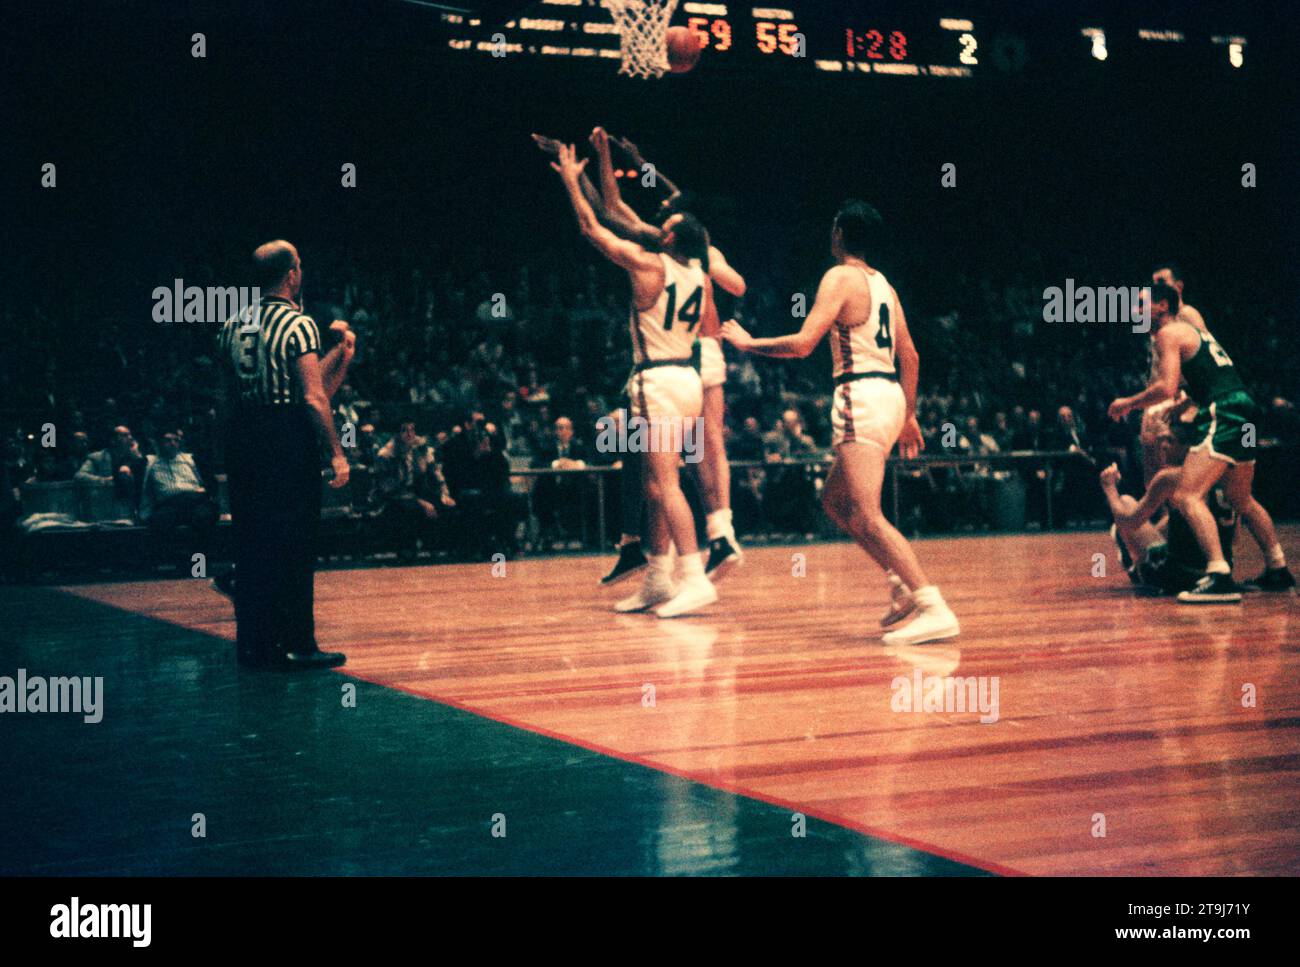 NEW YORK, NY - OCTOBER 25: Bill Russell #6 of the Boston Celtics grabs the rebound as Kenny Sears #12 and Charlie Tyra #14 of the New York Knicks defend during an NBA game on October 25, 1958 at the Madison Square Garden in New York, New York.  (Photo by Hy Peskin) *** Local Caption *** Bill Russell;Kenny Sears;Charlie Tyra Stock Photo